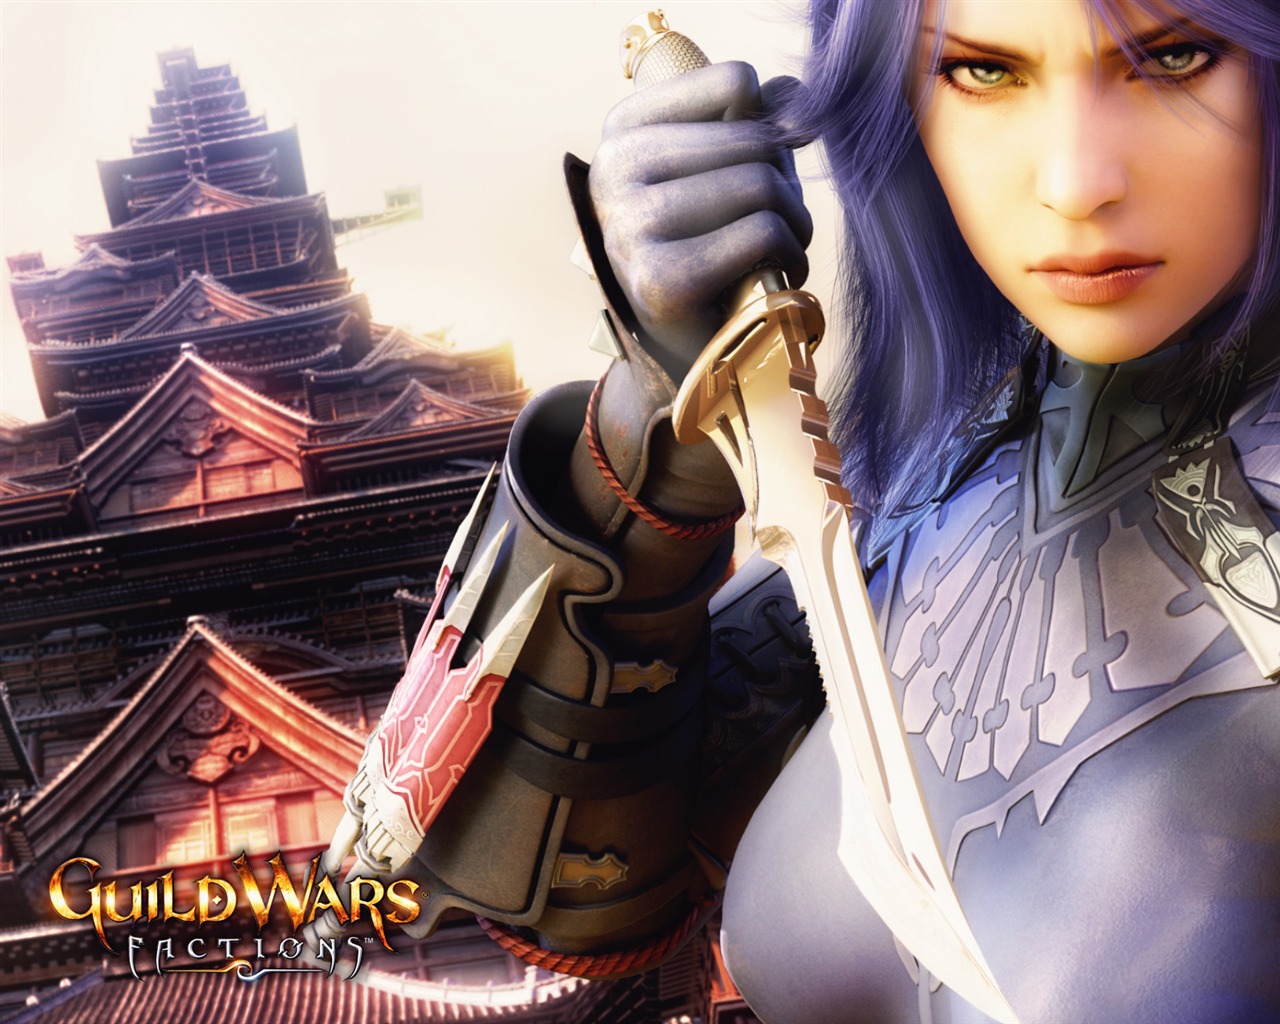 Guildwars tapety (1) #1 - 1280x1024